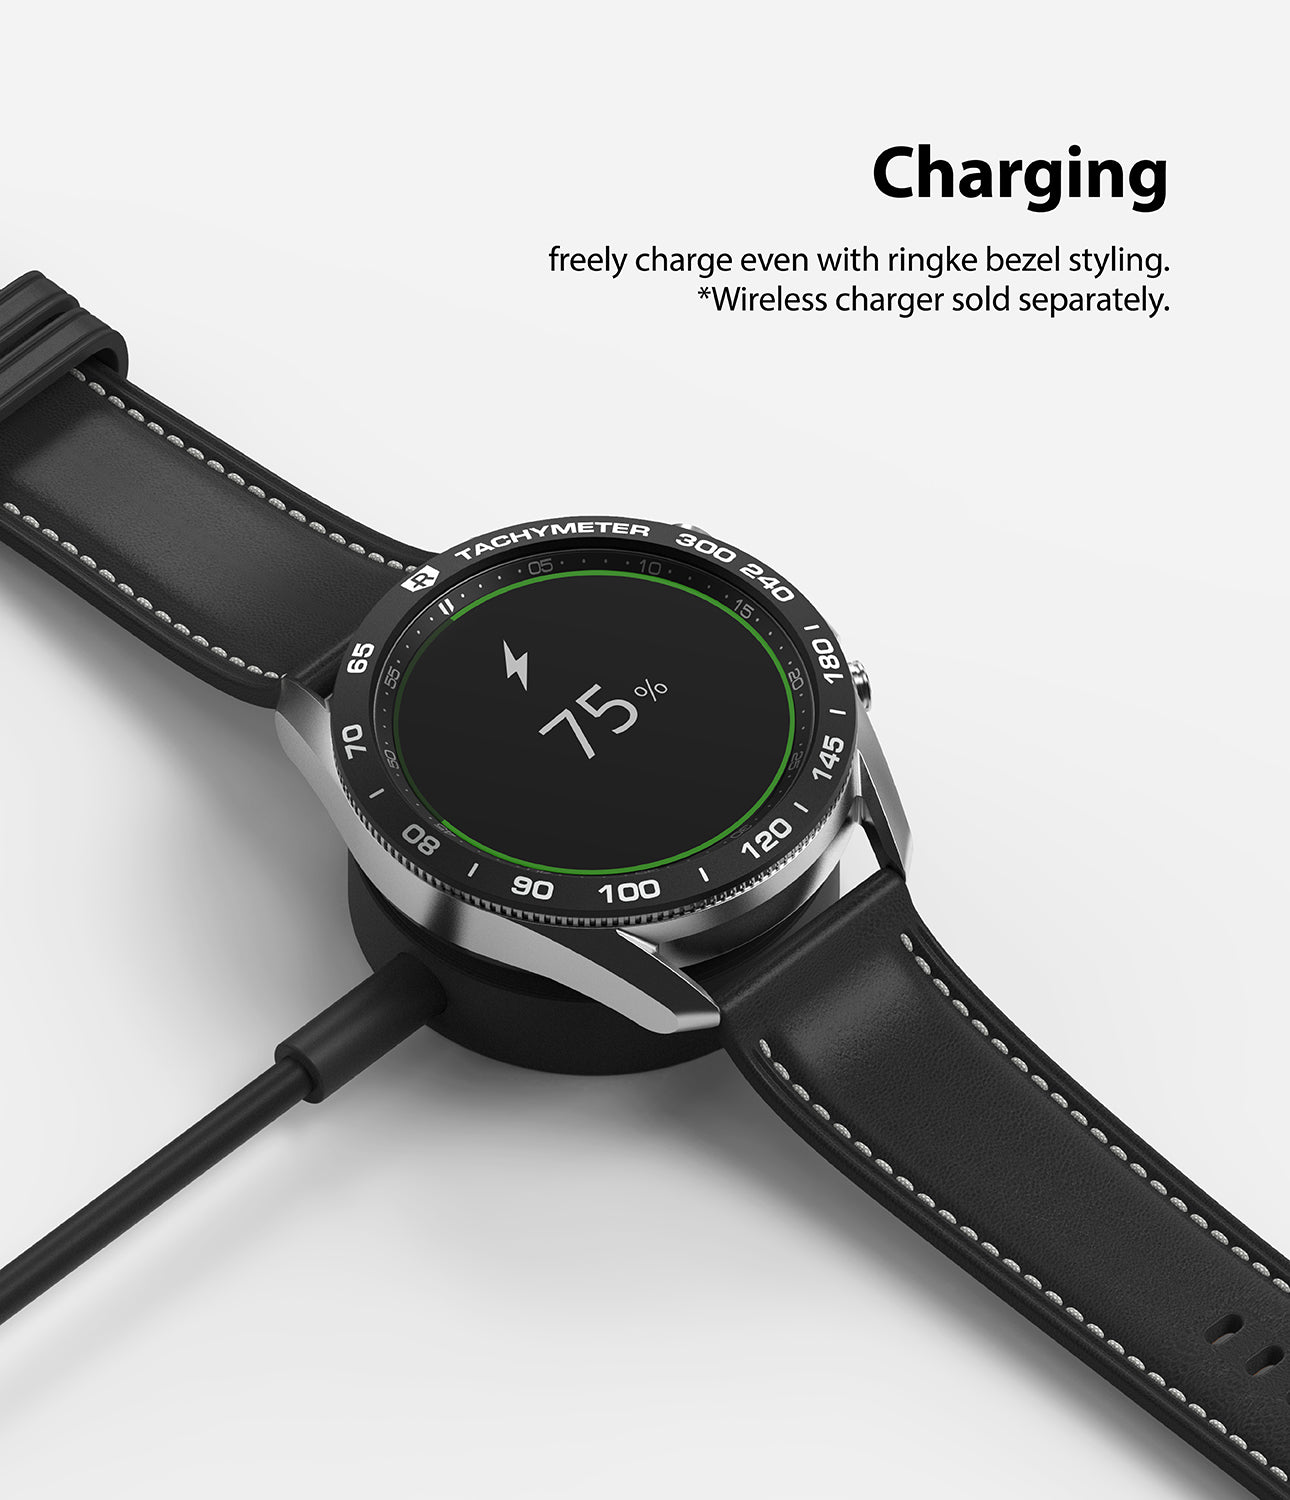 freely charge even with the bezel styling on *wireless charger sold separately